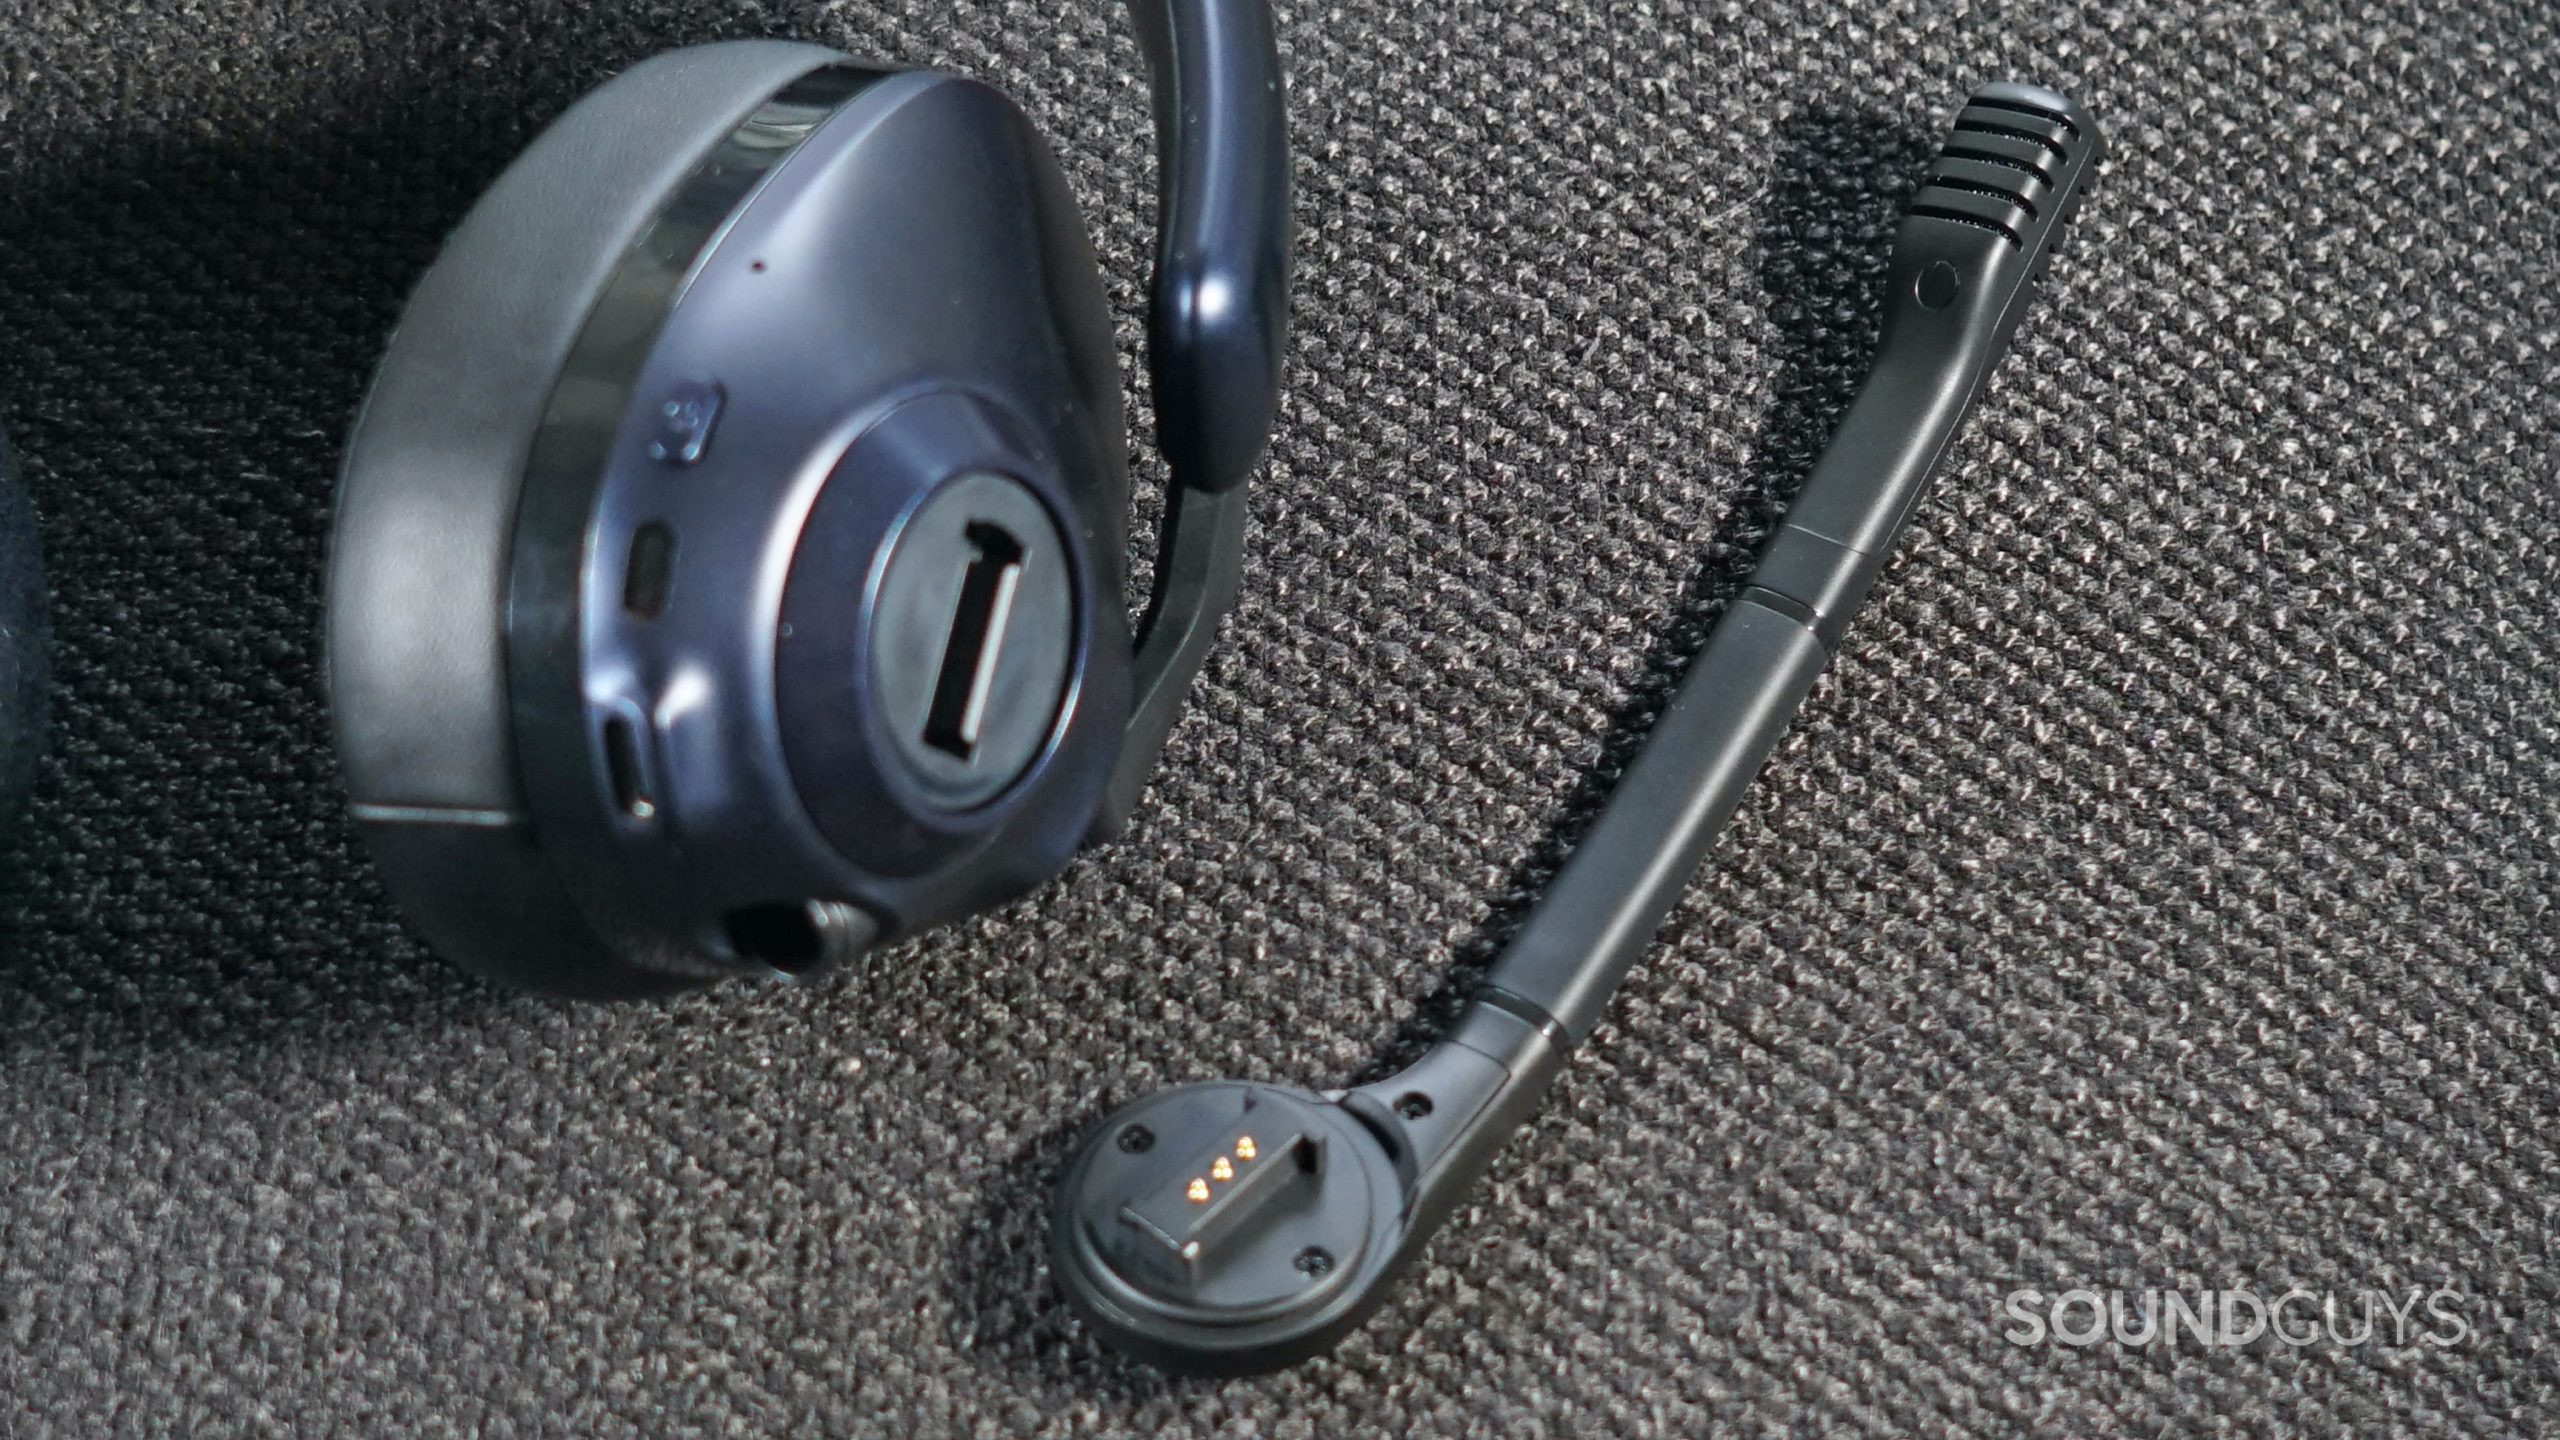 The EPOS H3PRO Hybrid gaming headset lays on a fabric surface with its microphone detached.